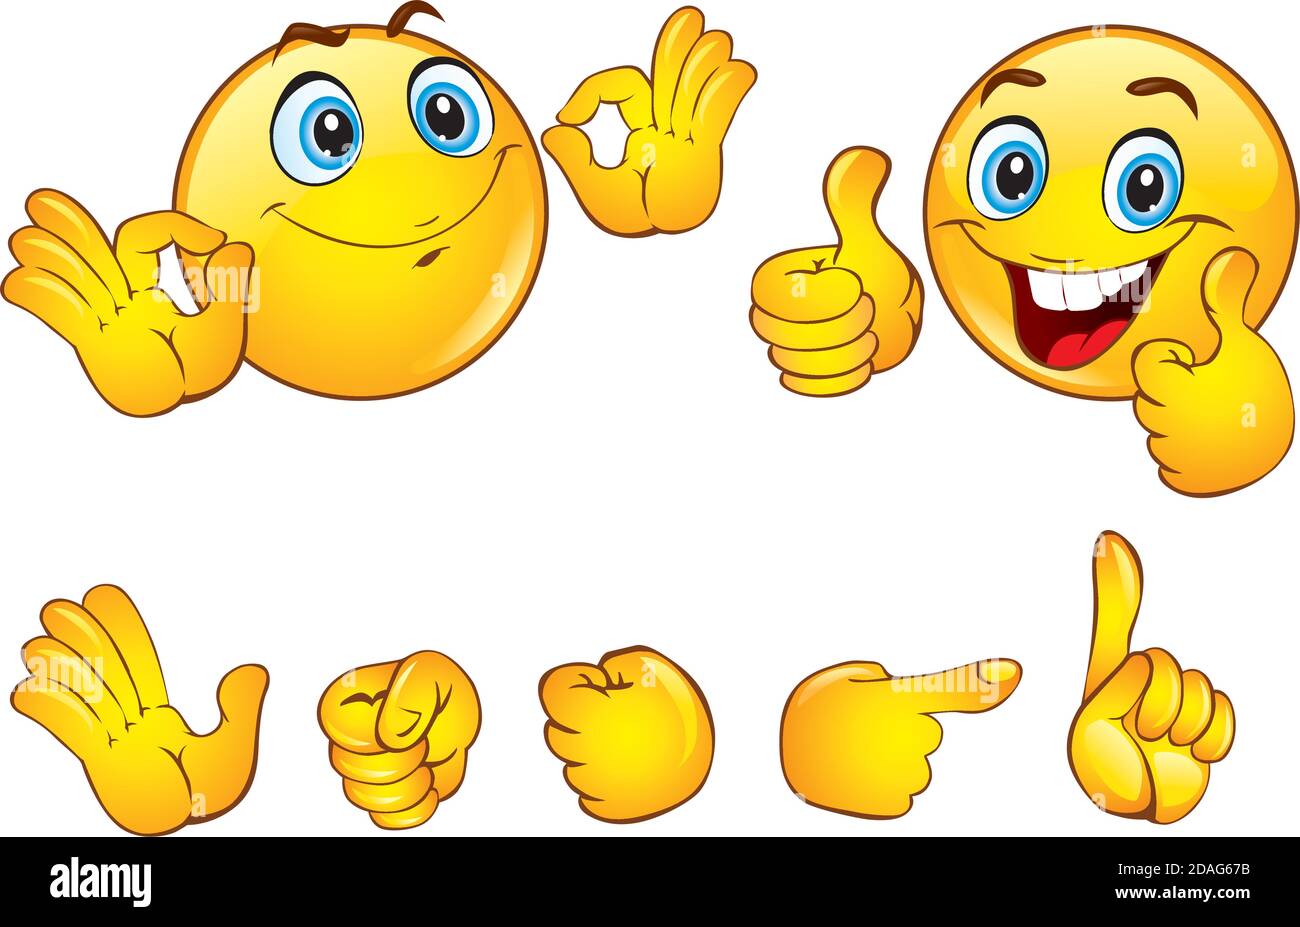 Set of Beautiful Smiley Faces with hand gestures / Emotional Icons. 3D Vector Illustration Stock Vector